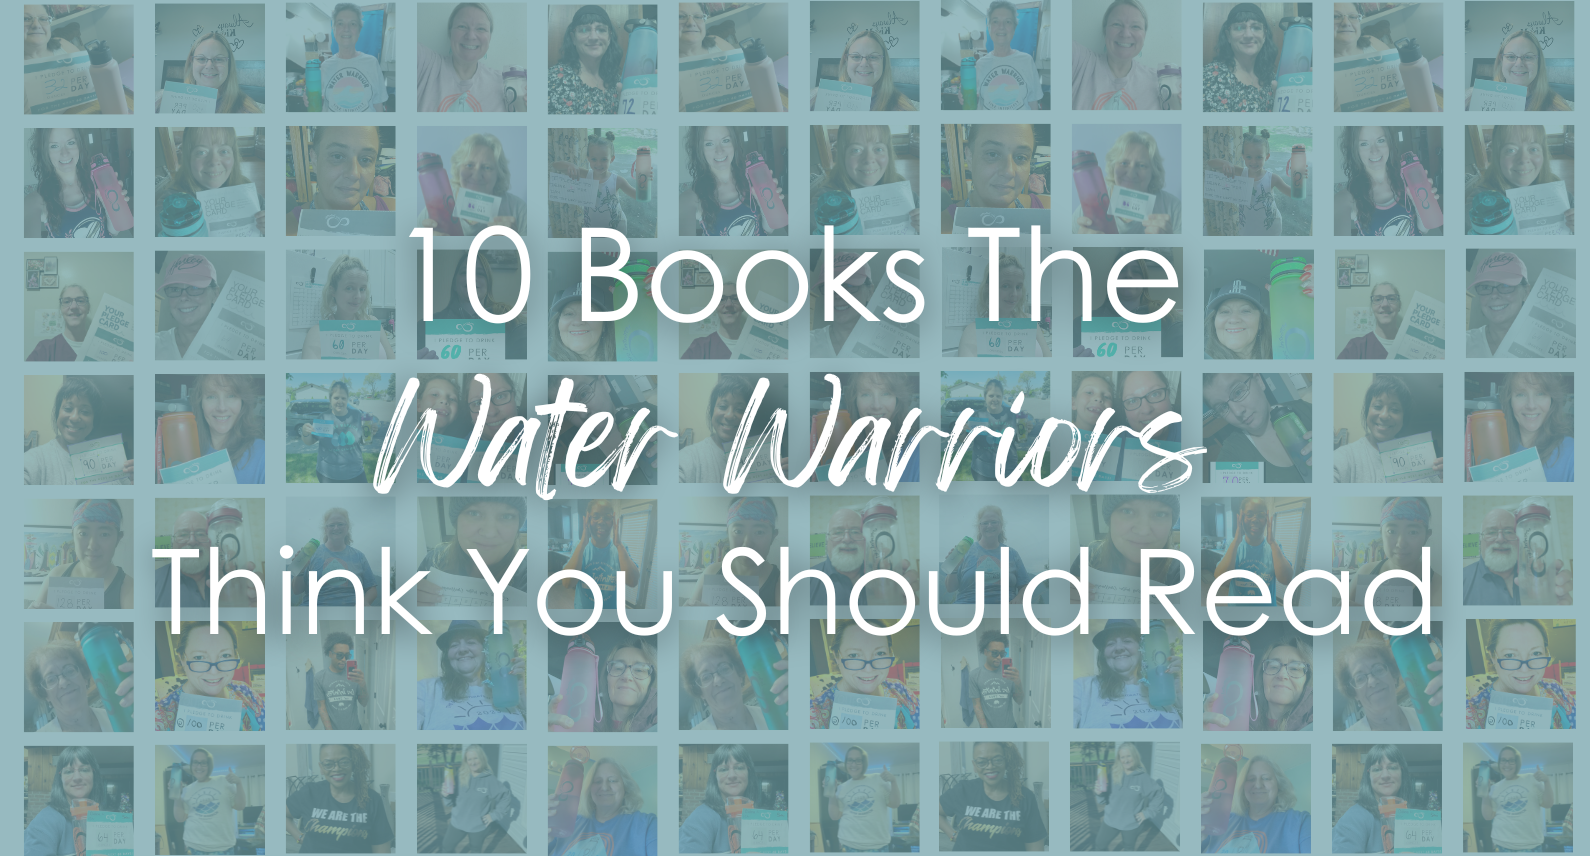 10 books the water warriors think you should read